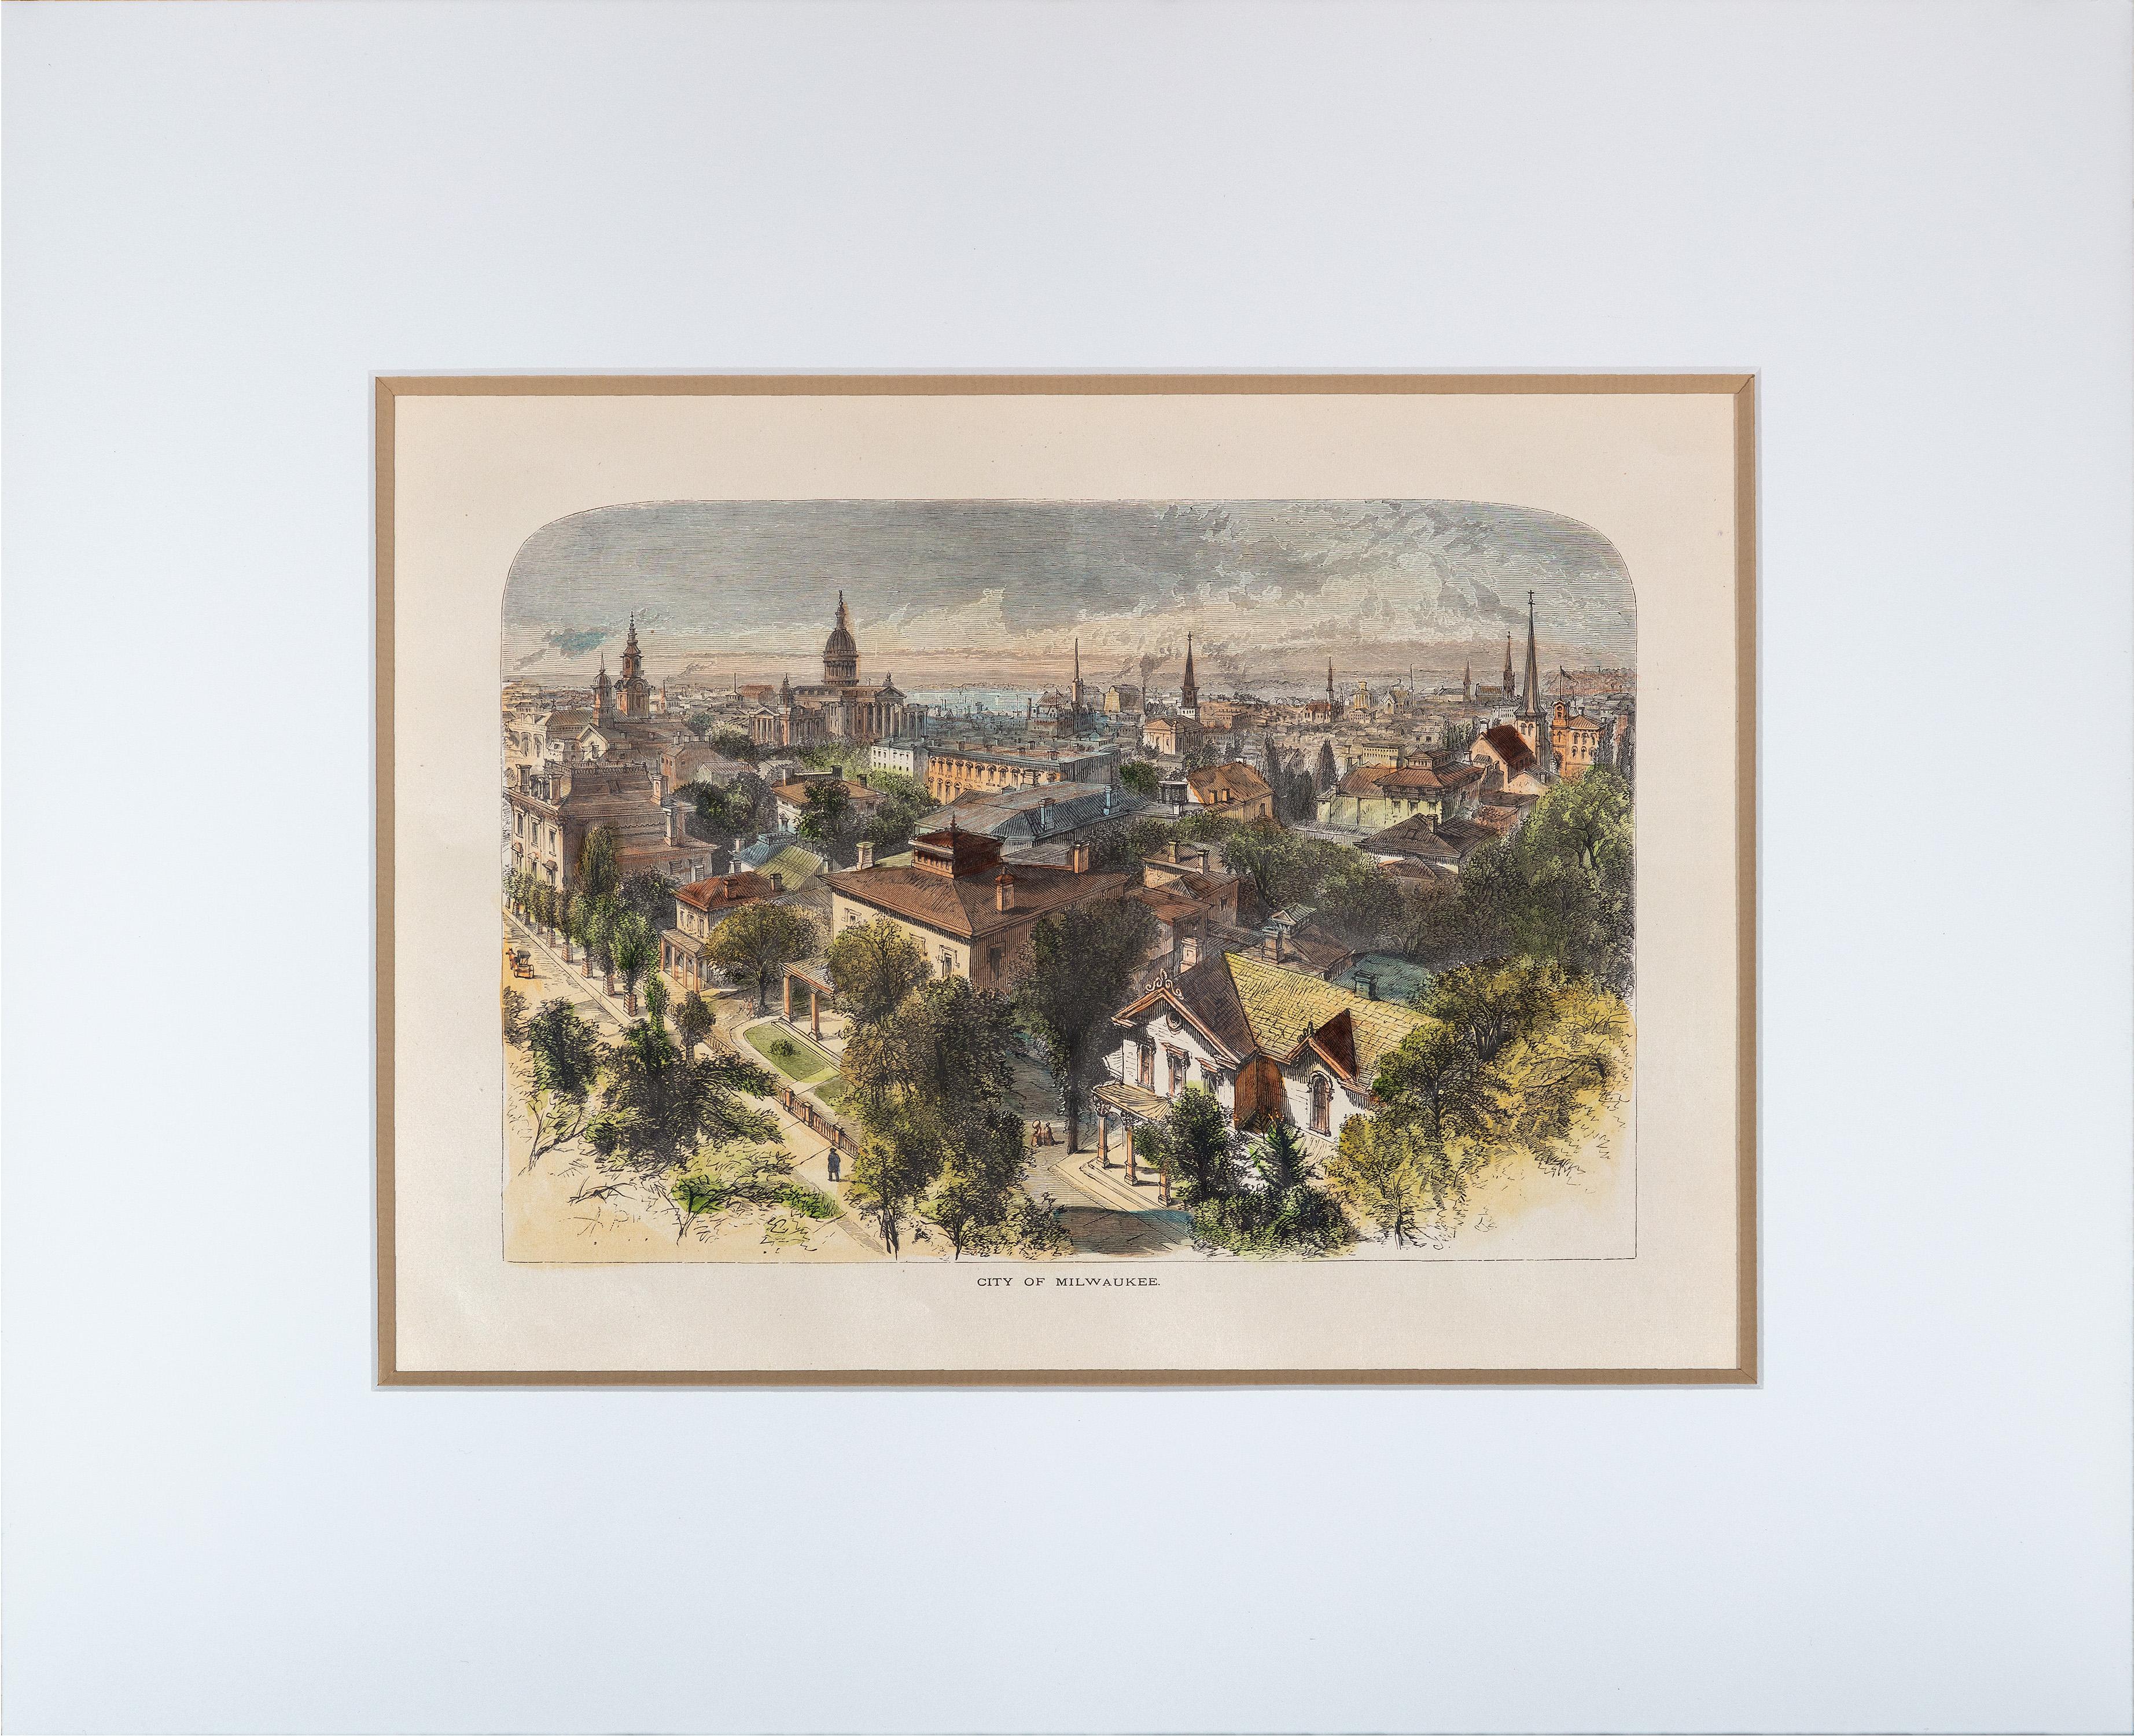 This image is a colored engraving of a city view of Milwaukee, Wisconsin, in 1873. The reverse depicts a lake view of the city of Racine, Wisconsin, a city to the south of Milwaukee. The image of Milwaukee shows a tree-lined street with stately